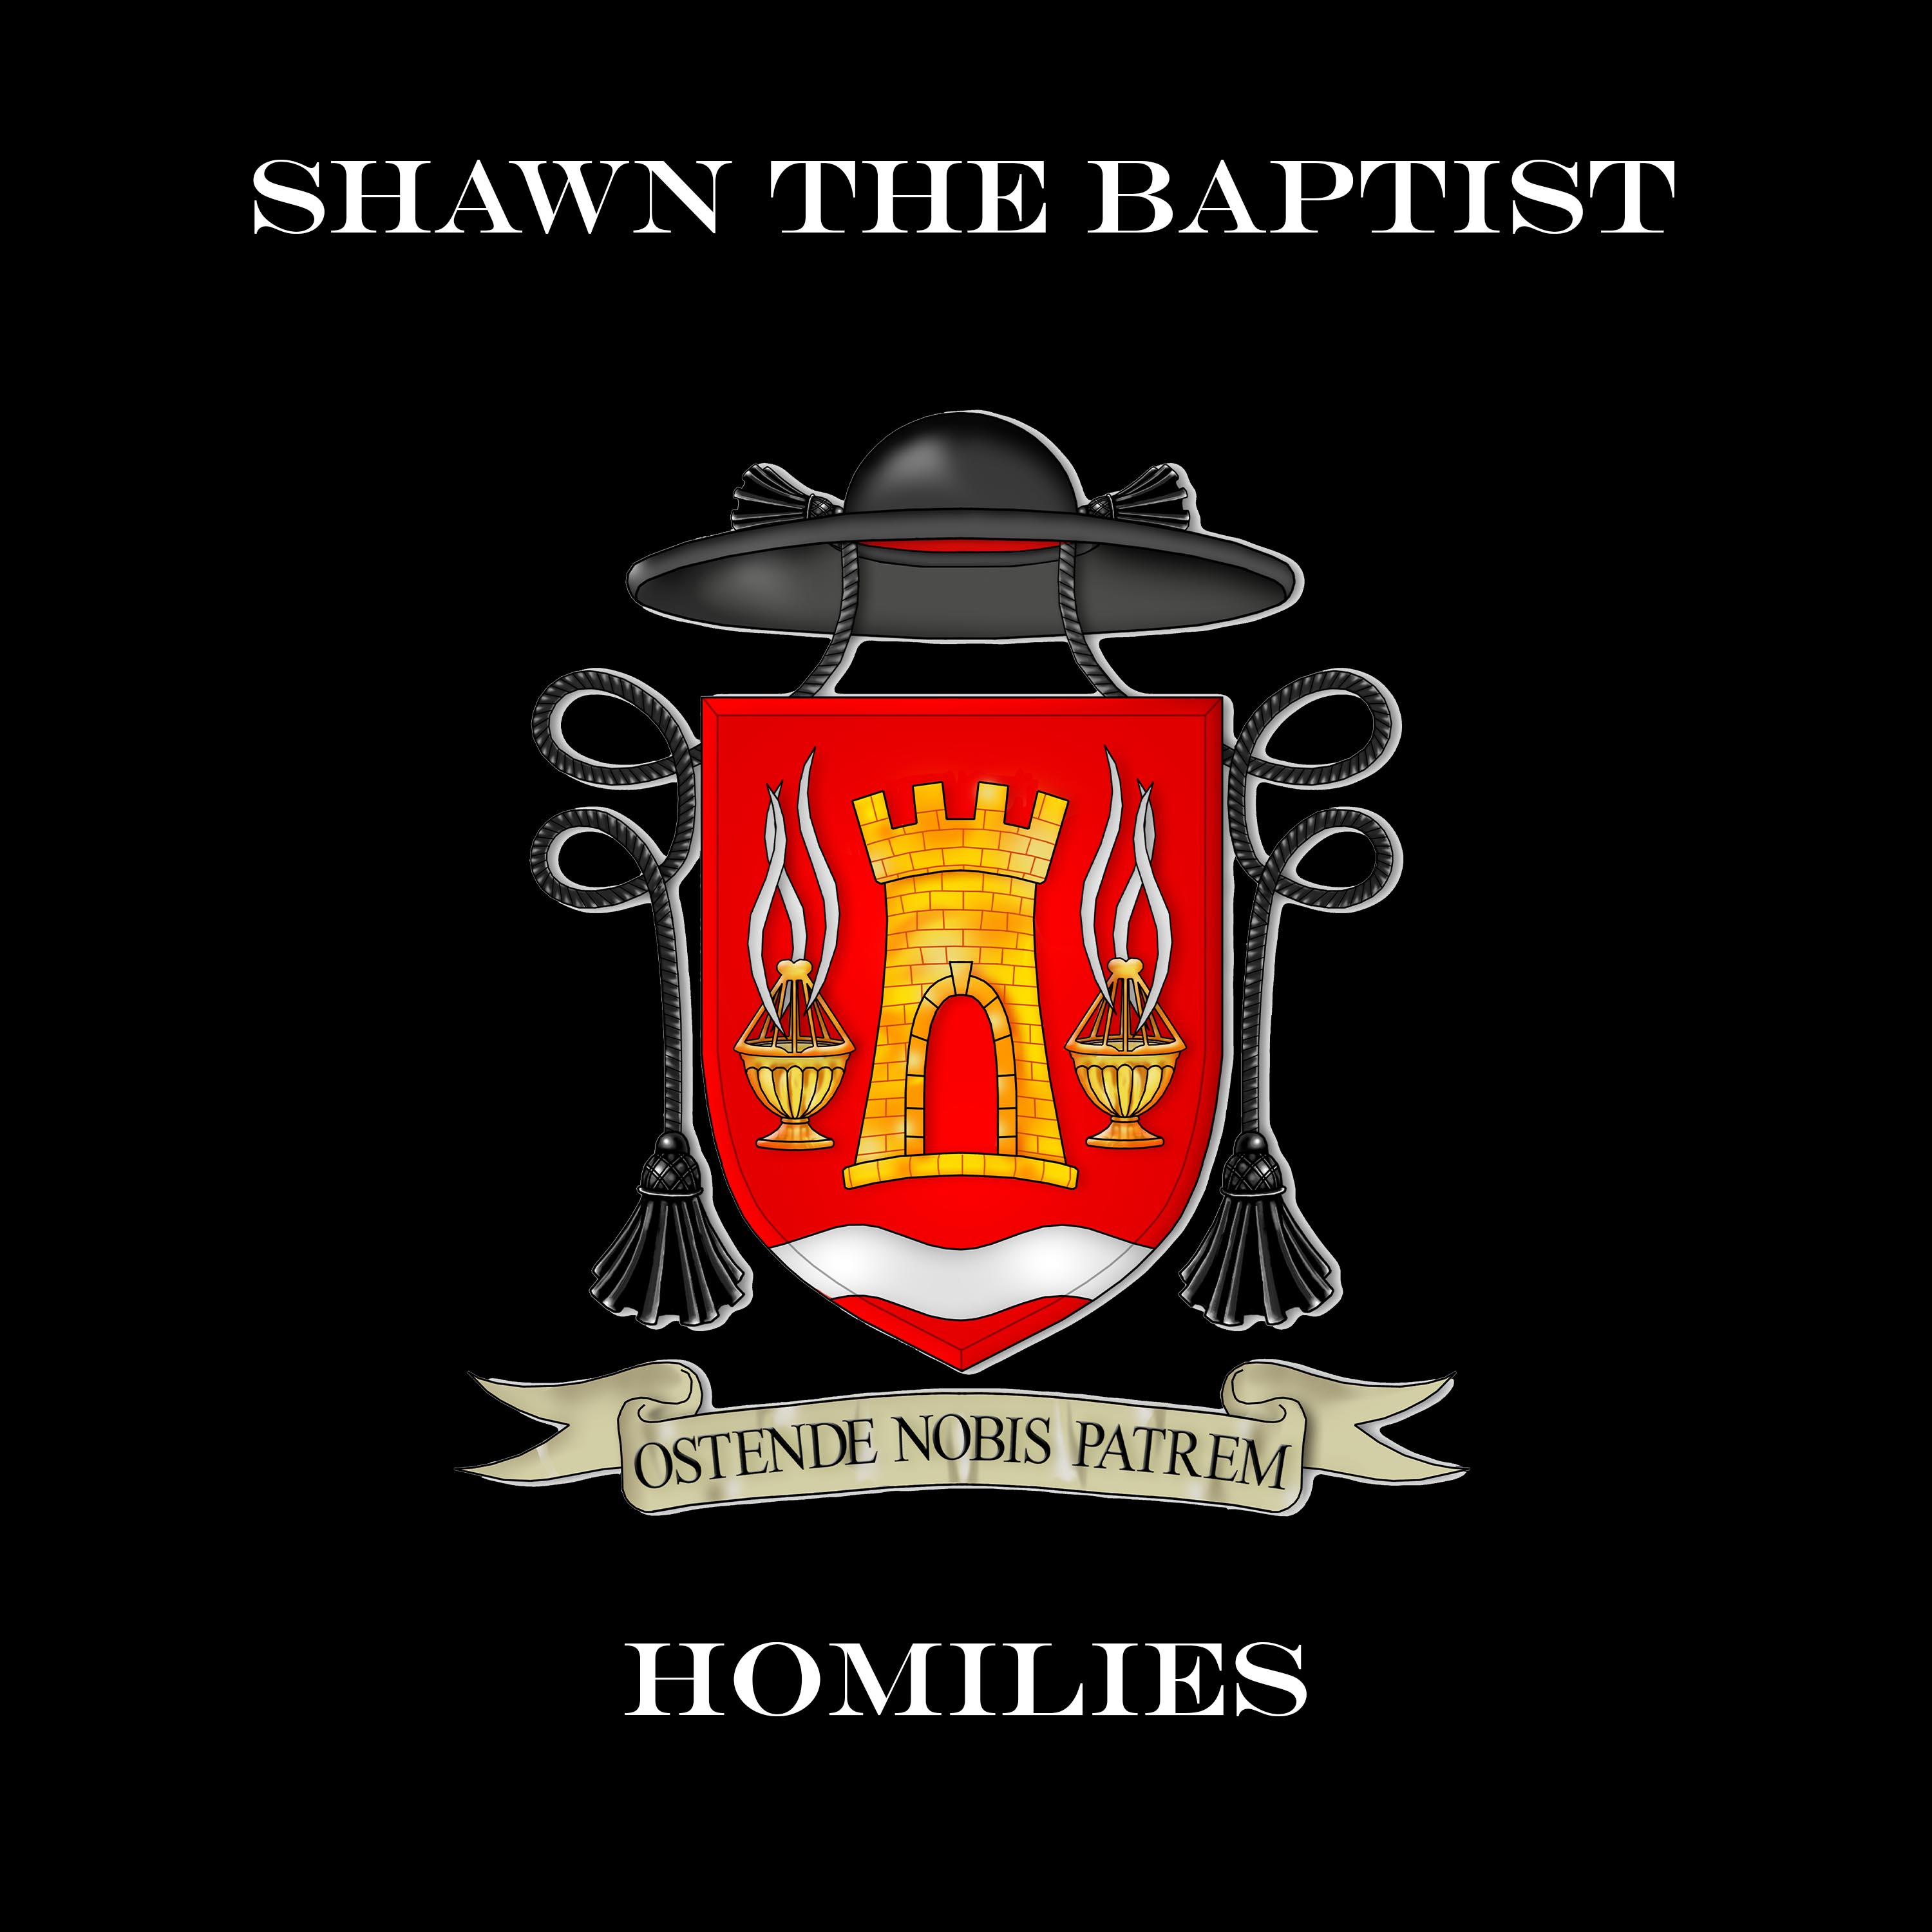 Shawn The Baptist Homilies